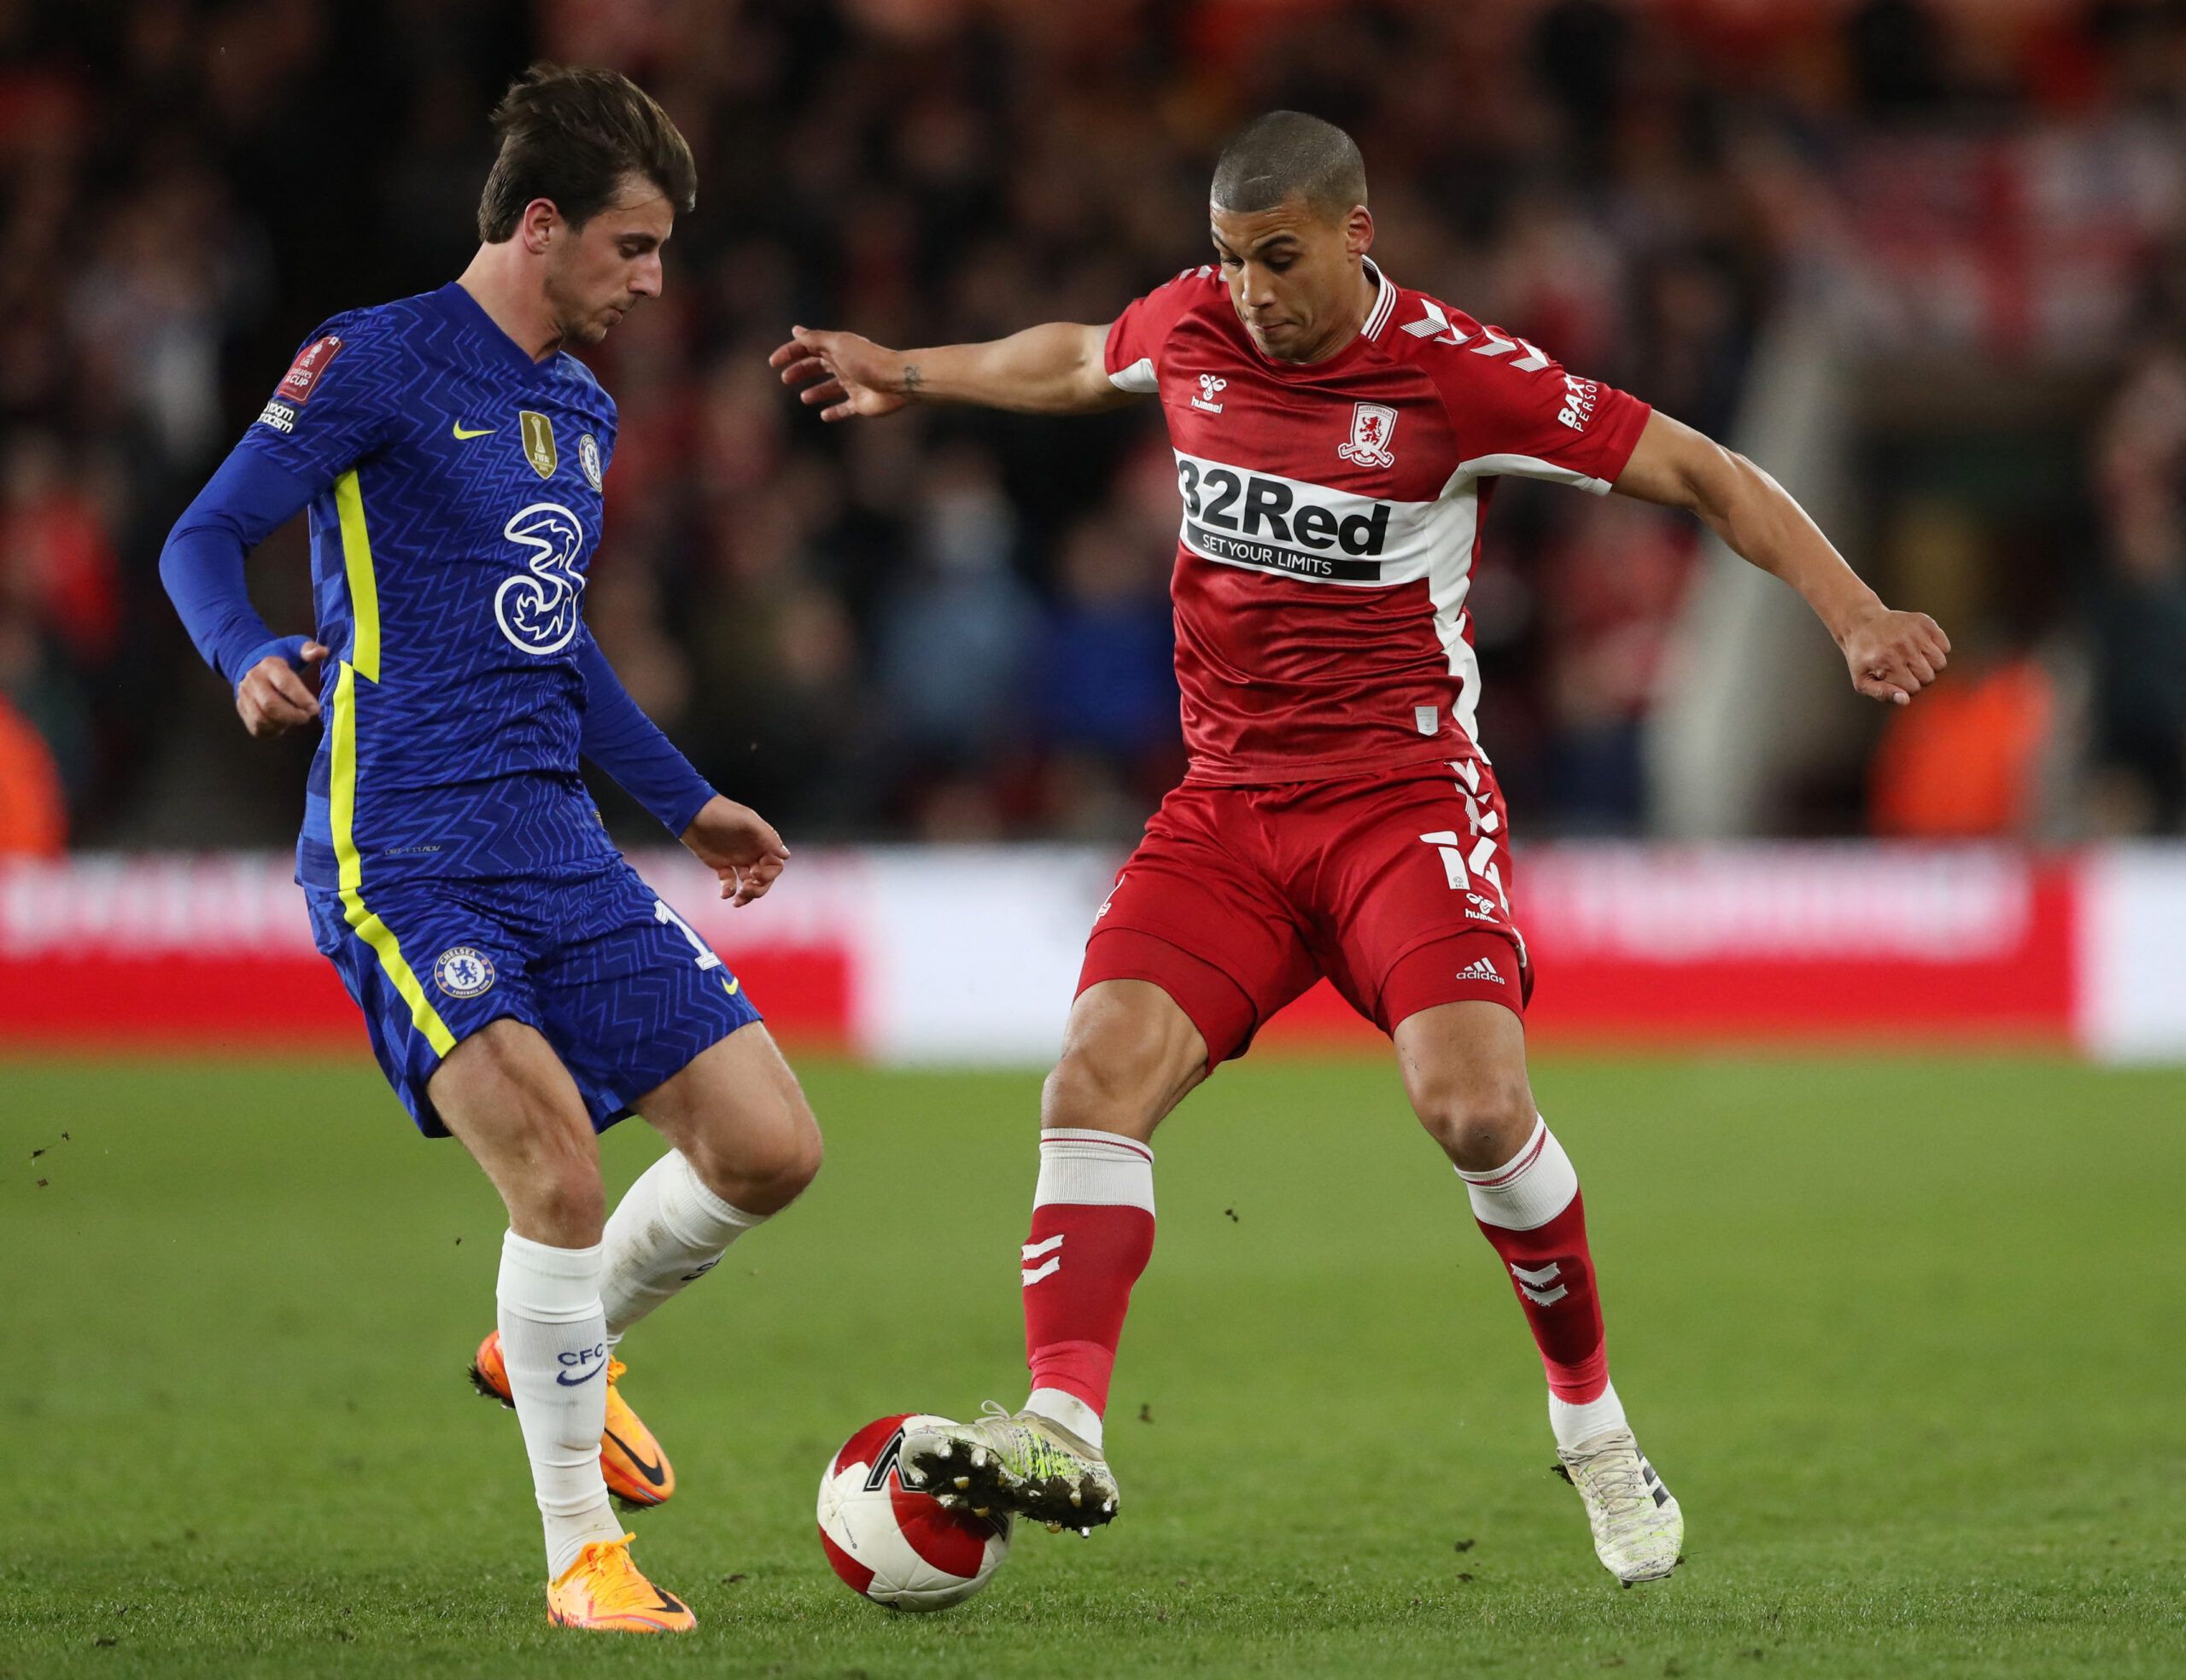 Soccer Football - FA Cup Quarter Final - Middlesbrough v Chelsea - Riverside Stadium, Middlesbrough, Britain - March 19, 2022 Middlesbrough's Lee Peltier in action with Chelsea's Mason Mount REUTERS/Scott Heppell